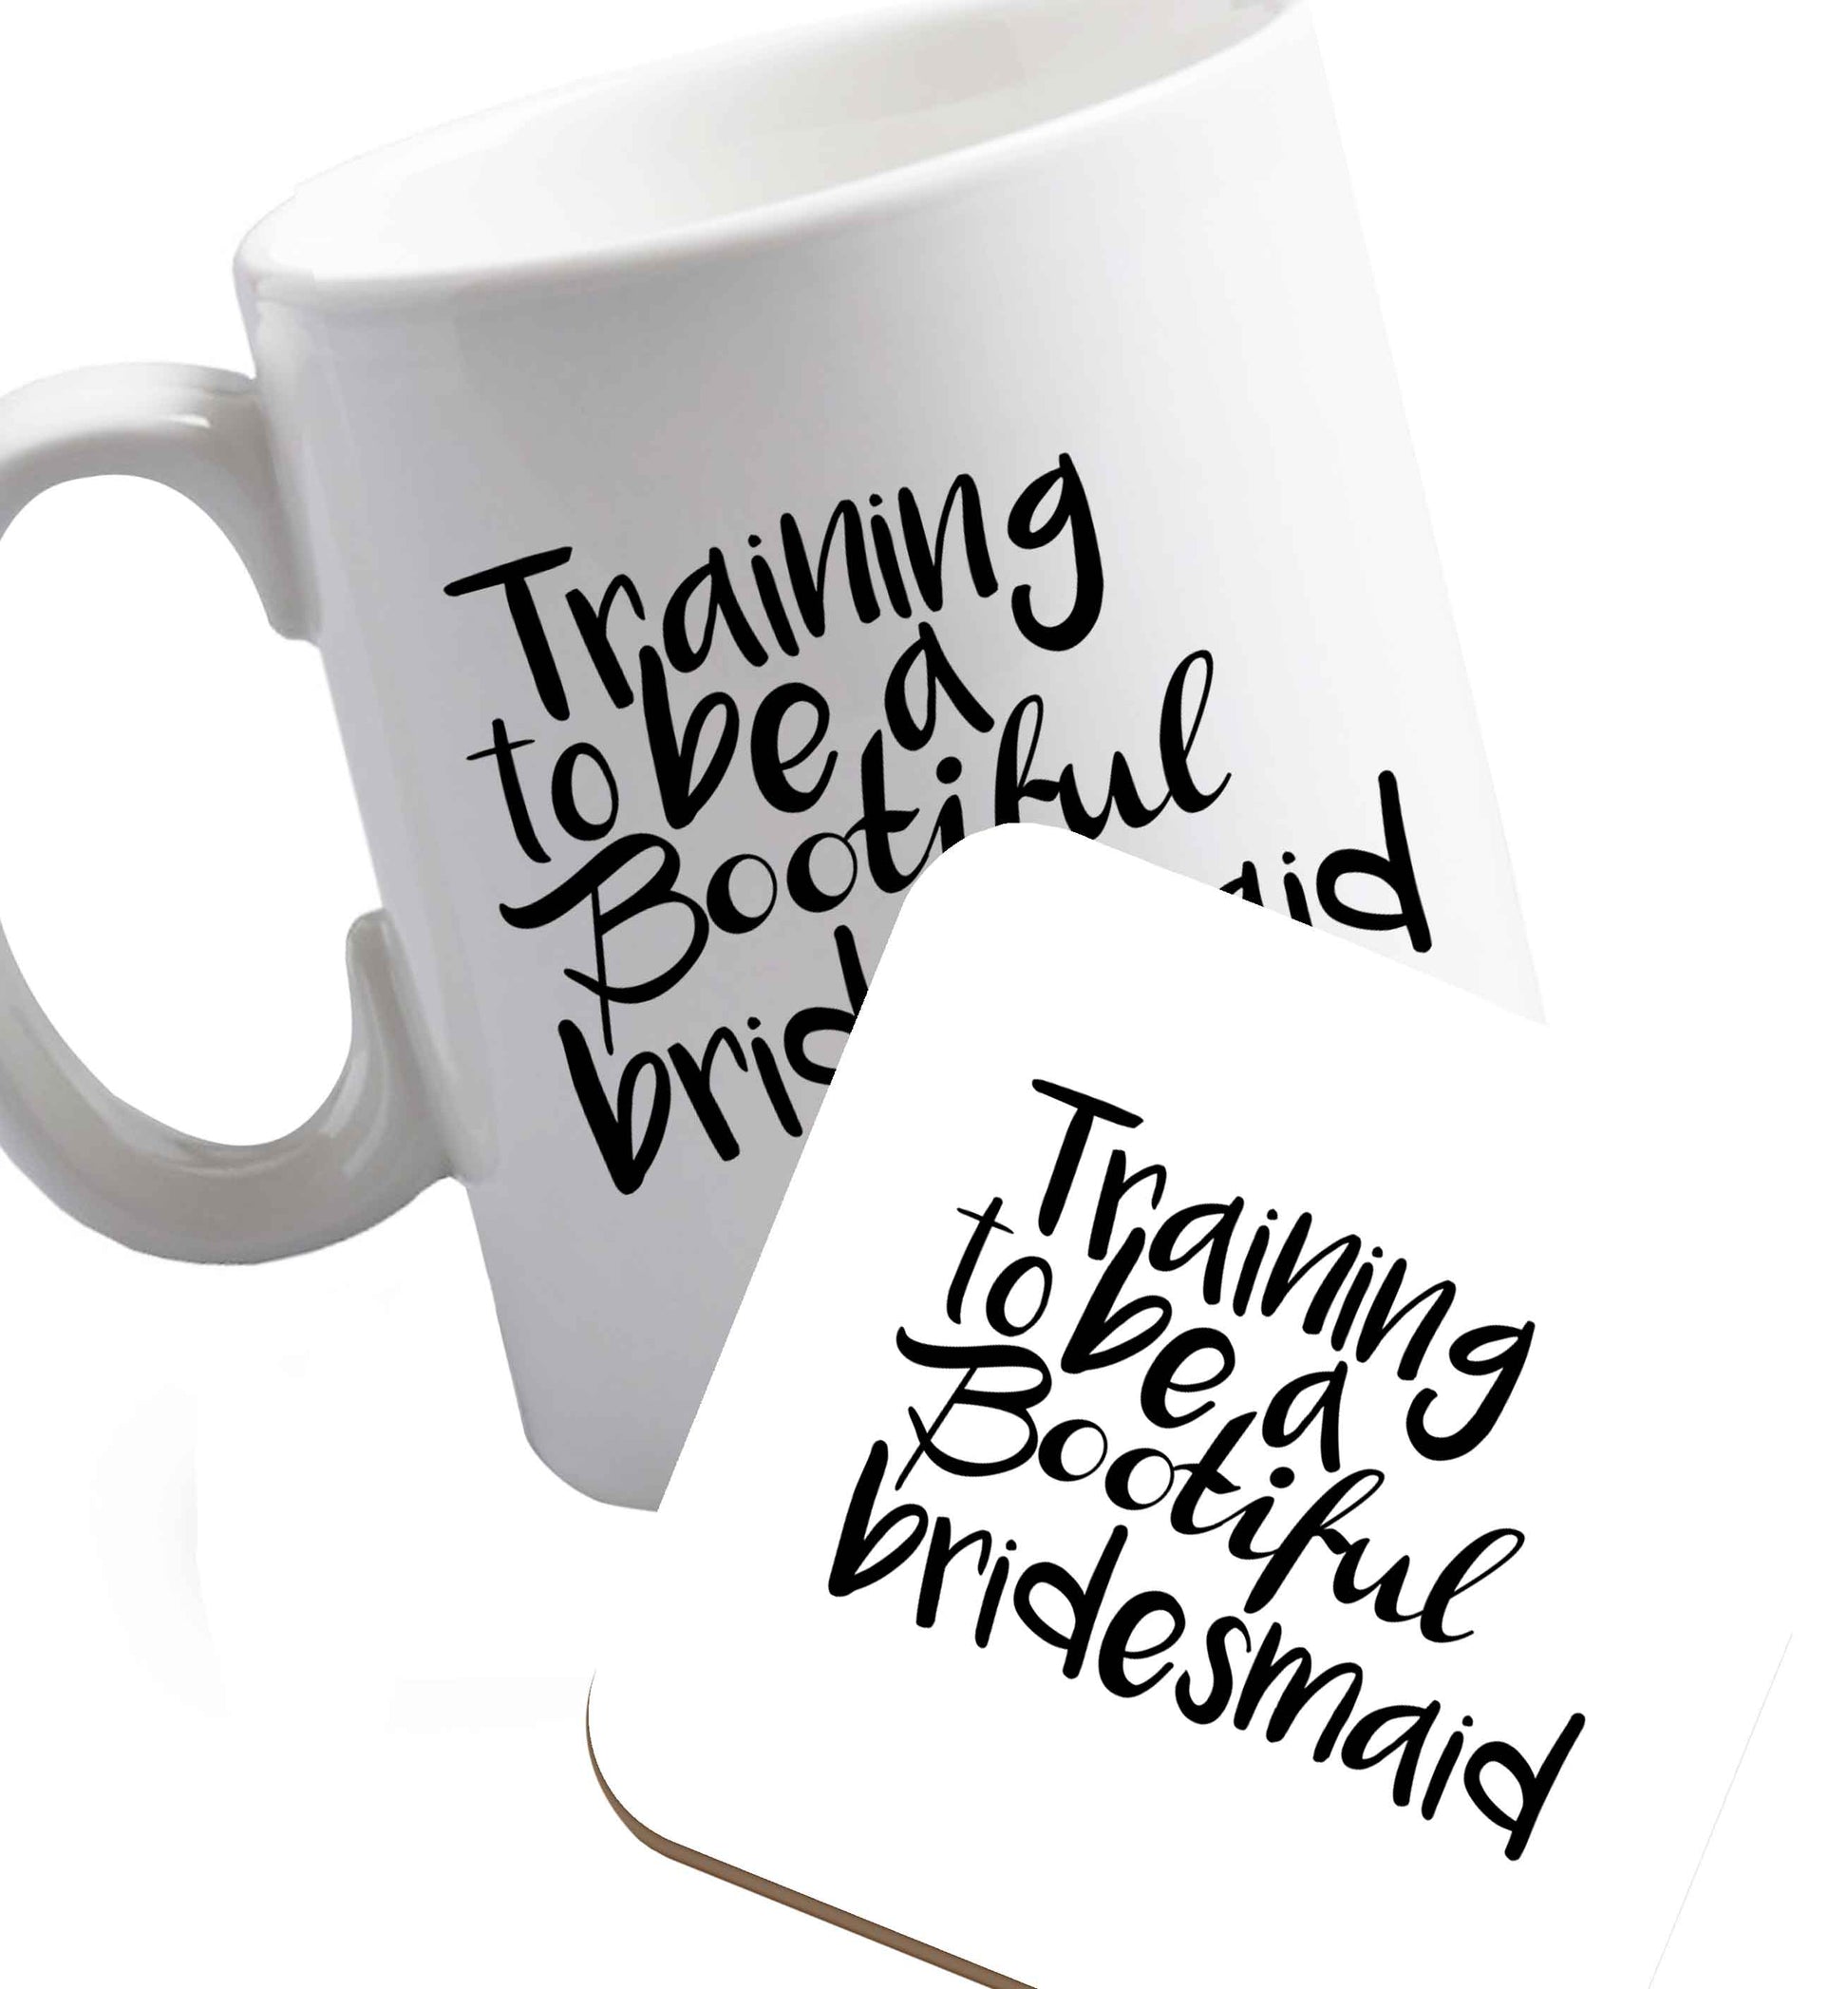 10 oz Get motivated and get fit for your big day! Our workout quotes and designs will get you ready to sweat! Perfect for any bride, groom or bridesmaid to be!    ceramic mug and coaster set right handed